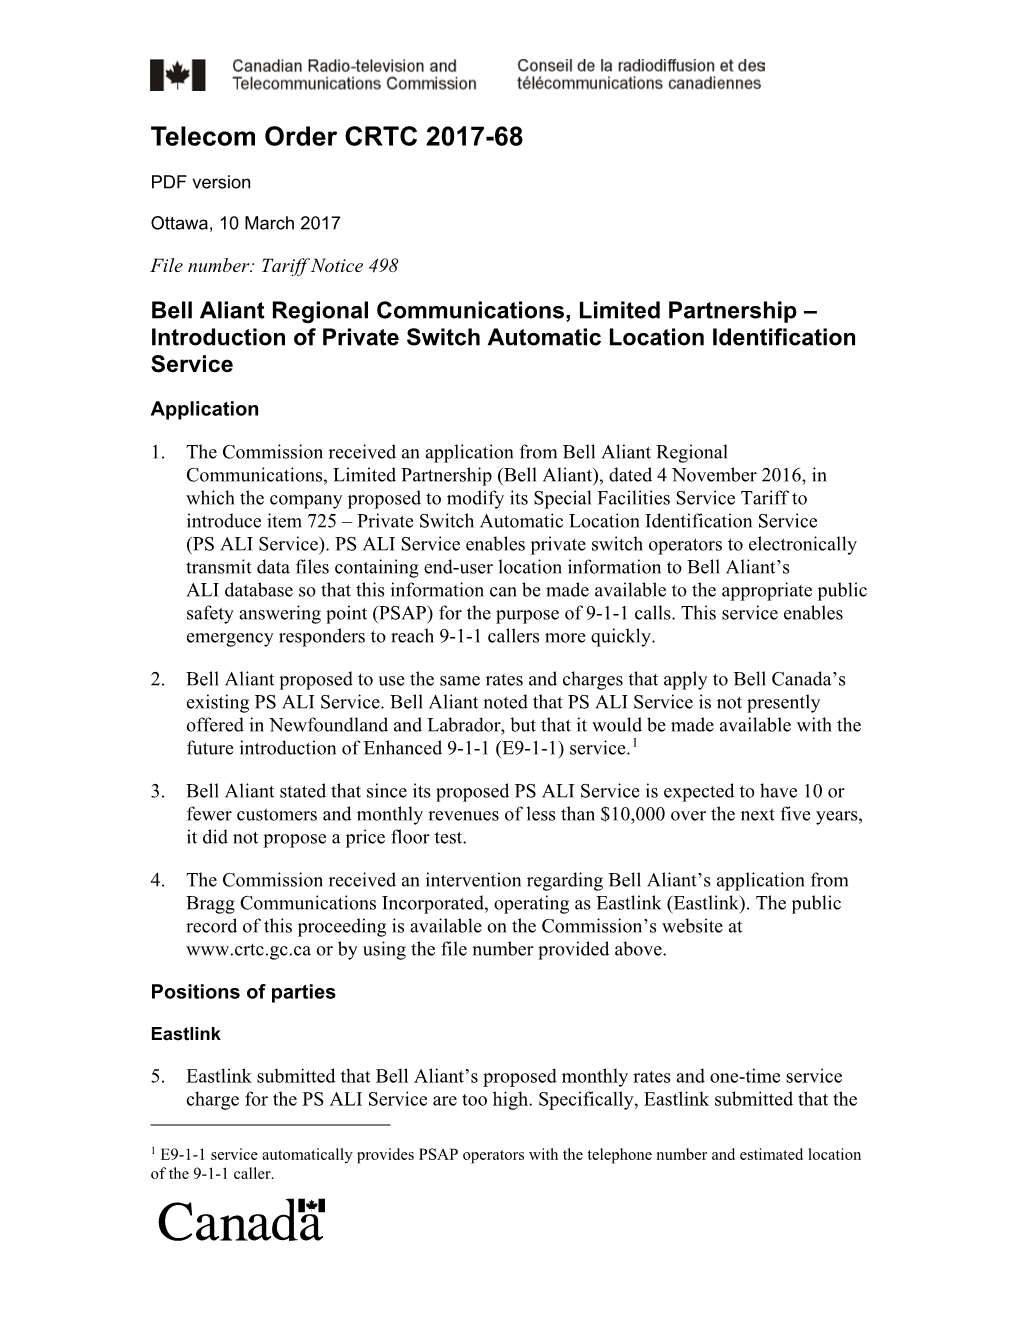 Bell Aliant Regional Communications, Limited Partnership – Introduction of Private Switch Automatic Location Identification Service